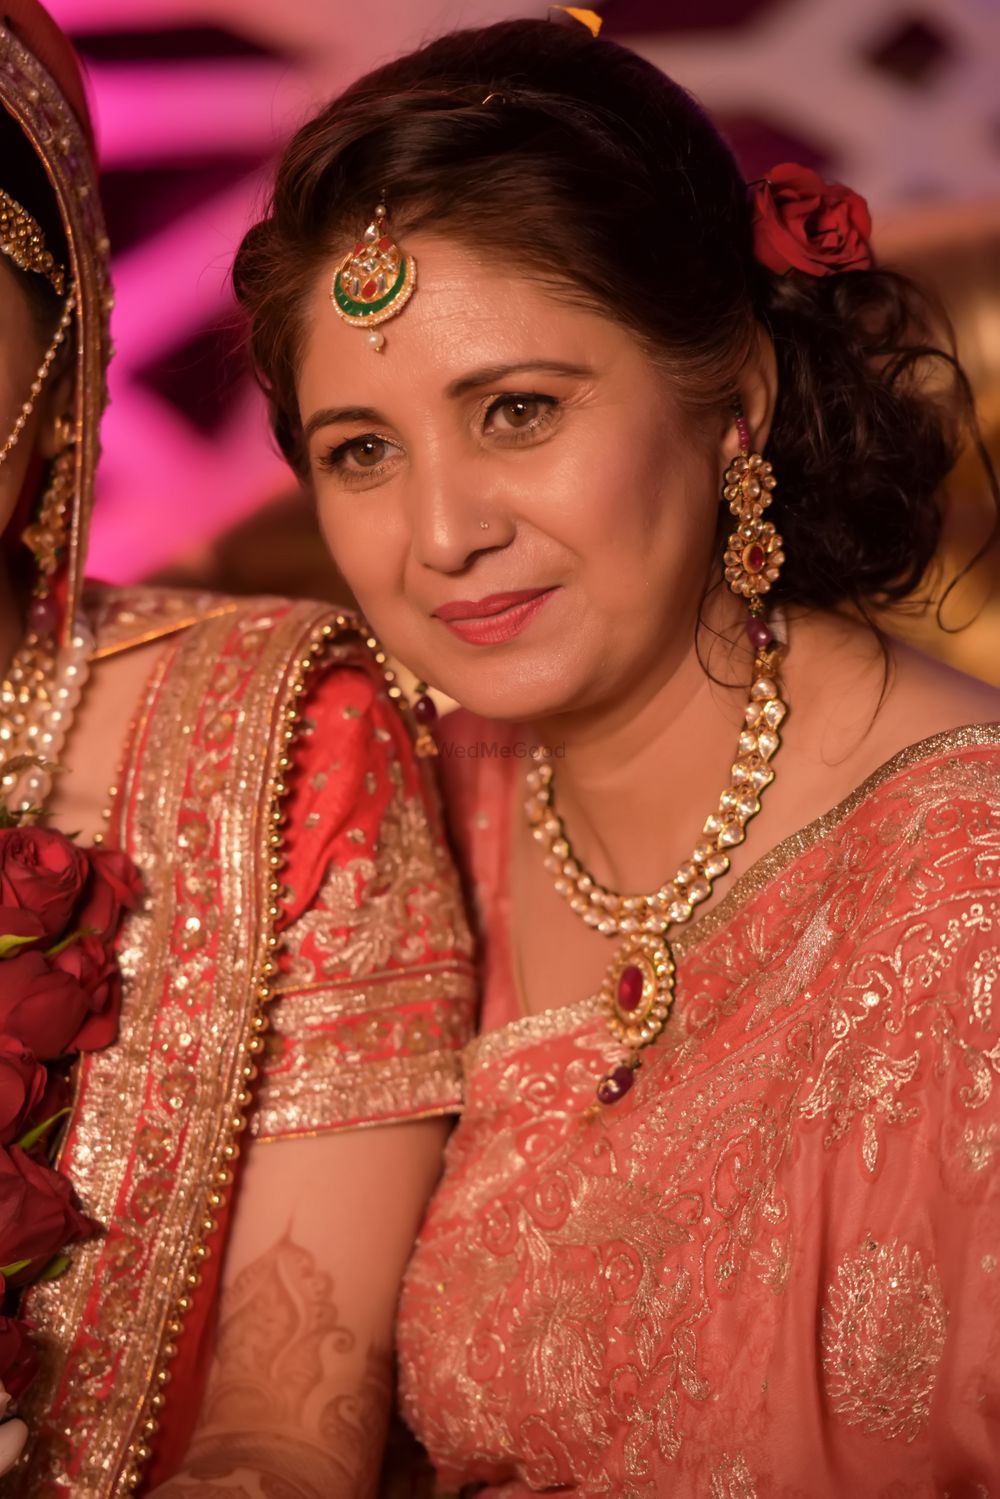 Photo From Wedding story of Sakriti and sulabh - By Weddinsta Pictures